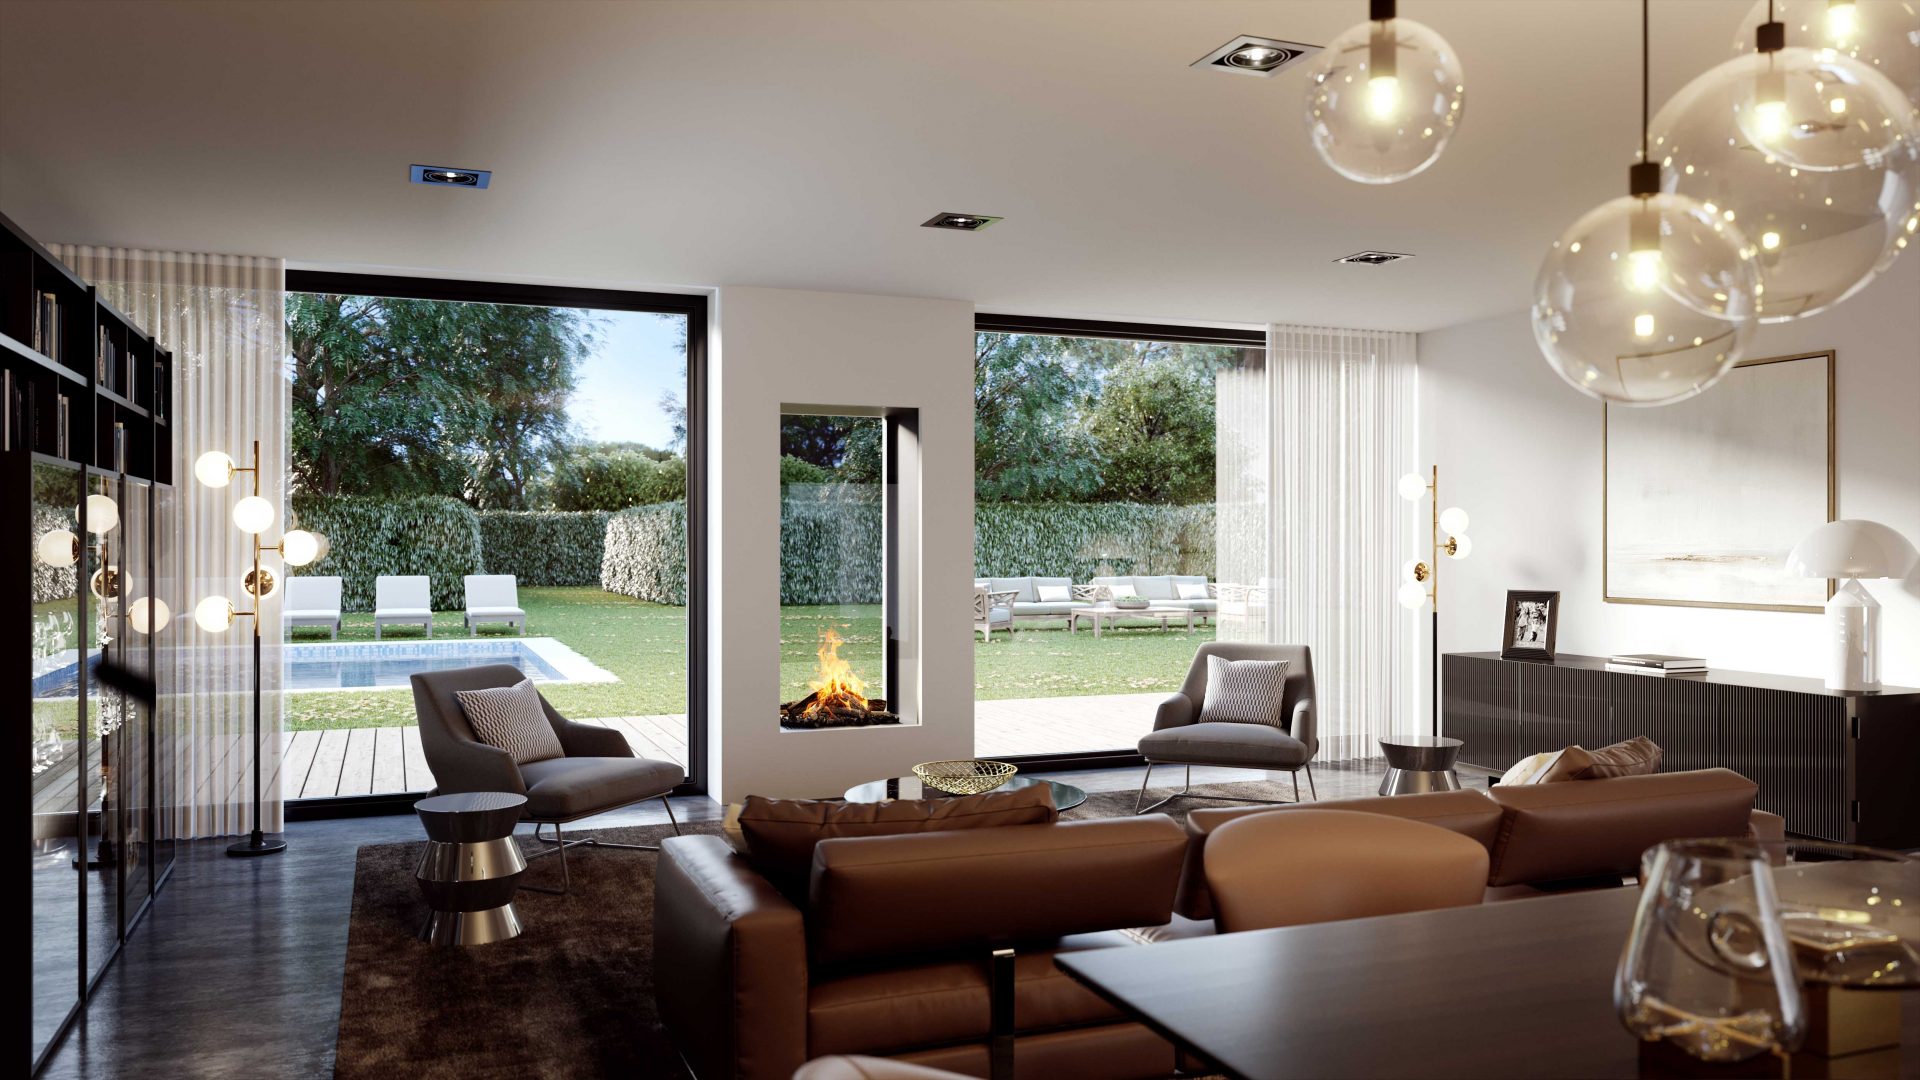 Modus Fireplaces - Double Sided Fireplaces - 850T Indoor & Outdoor Fireplace built into external wall